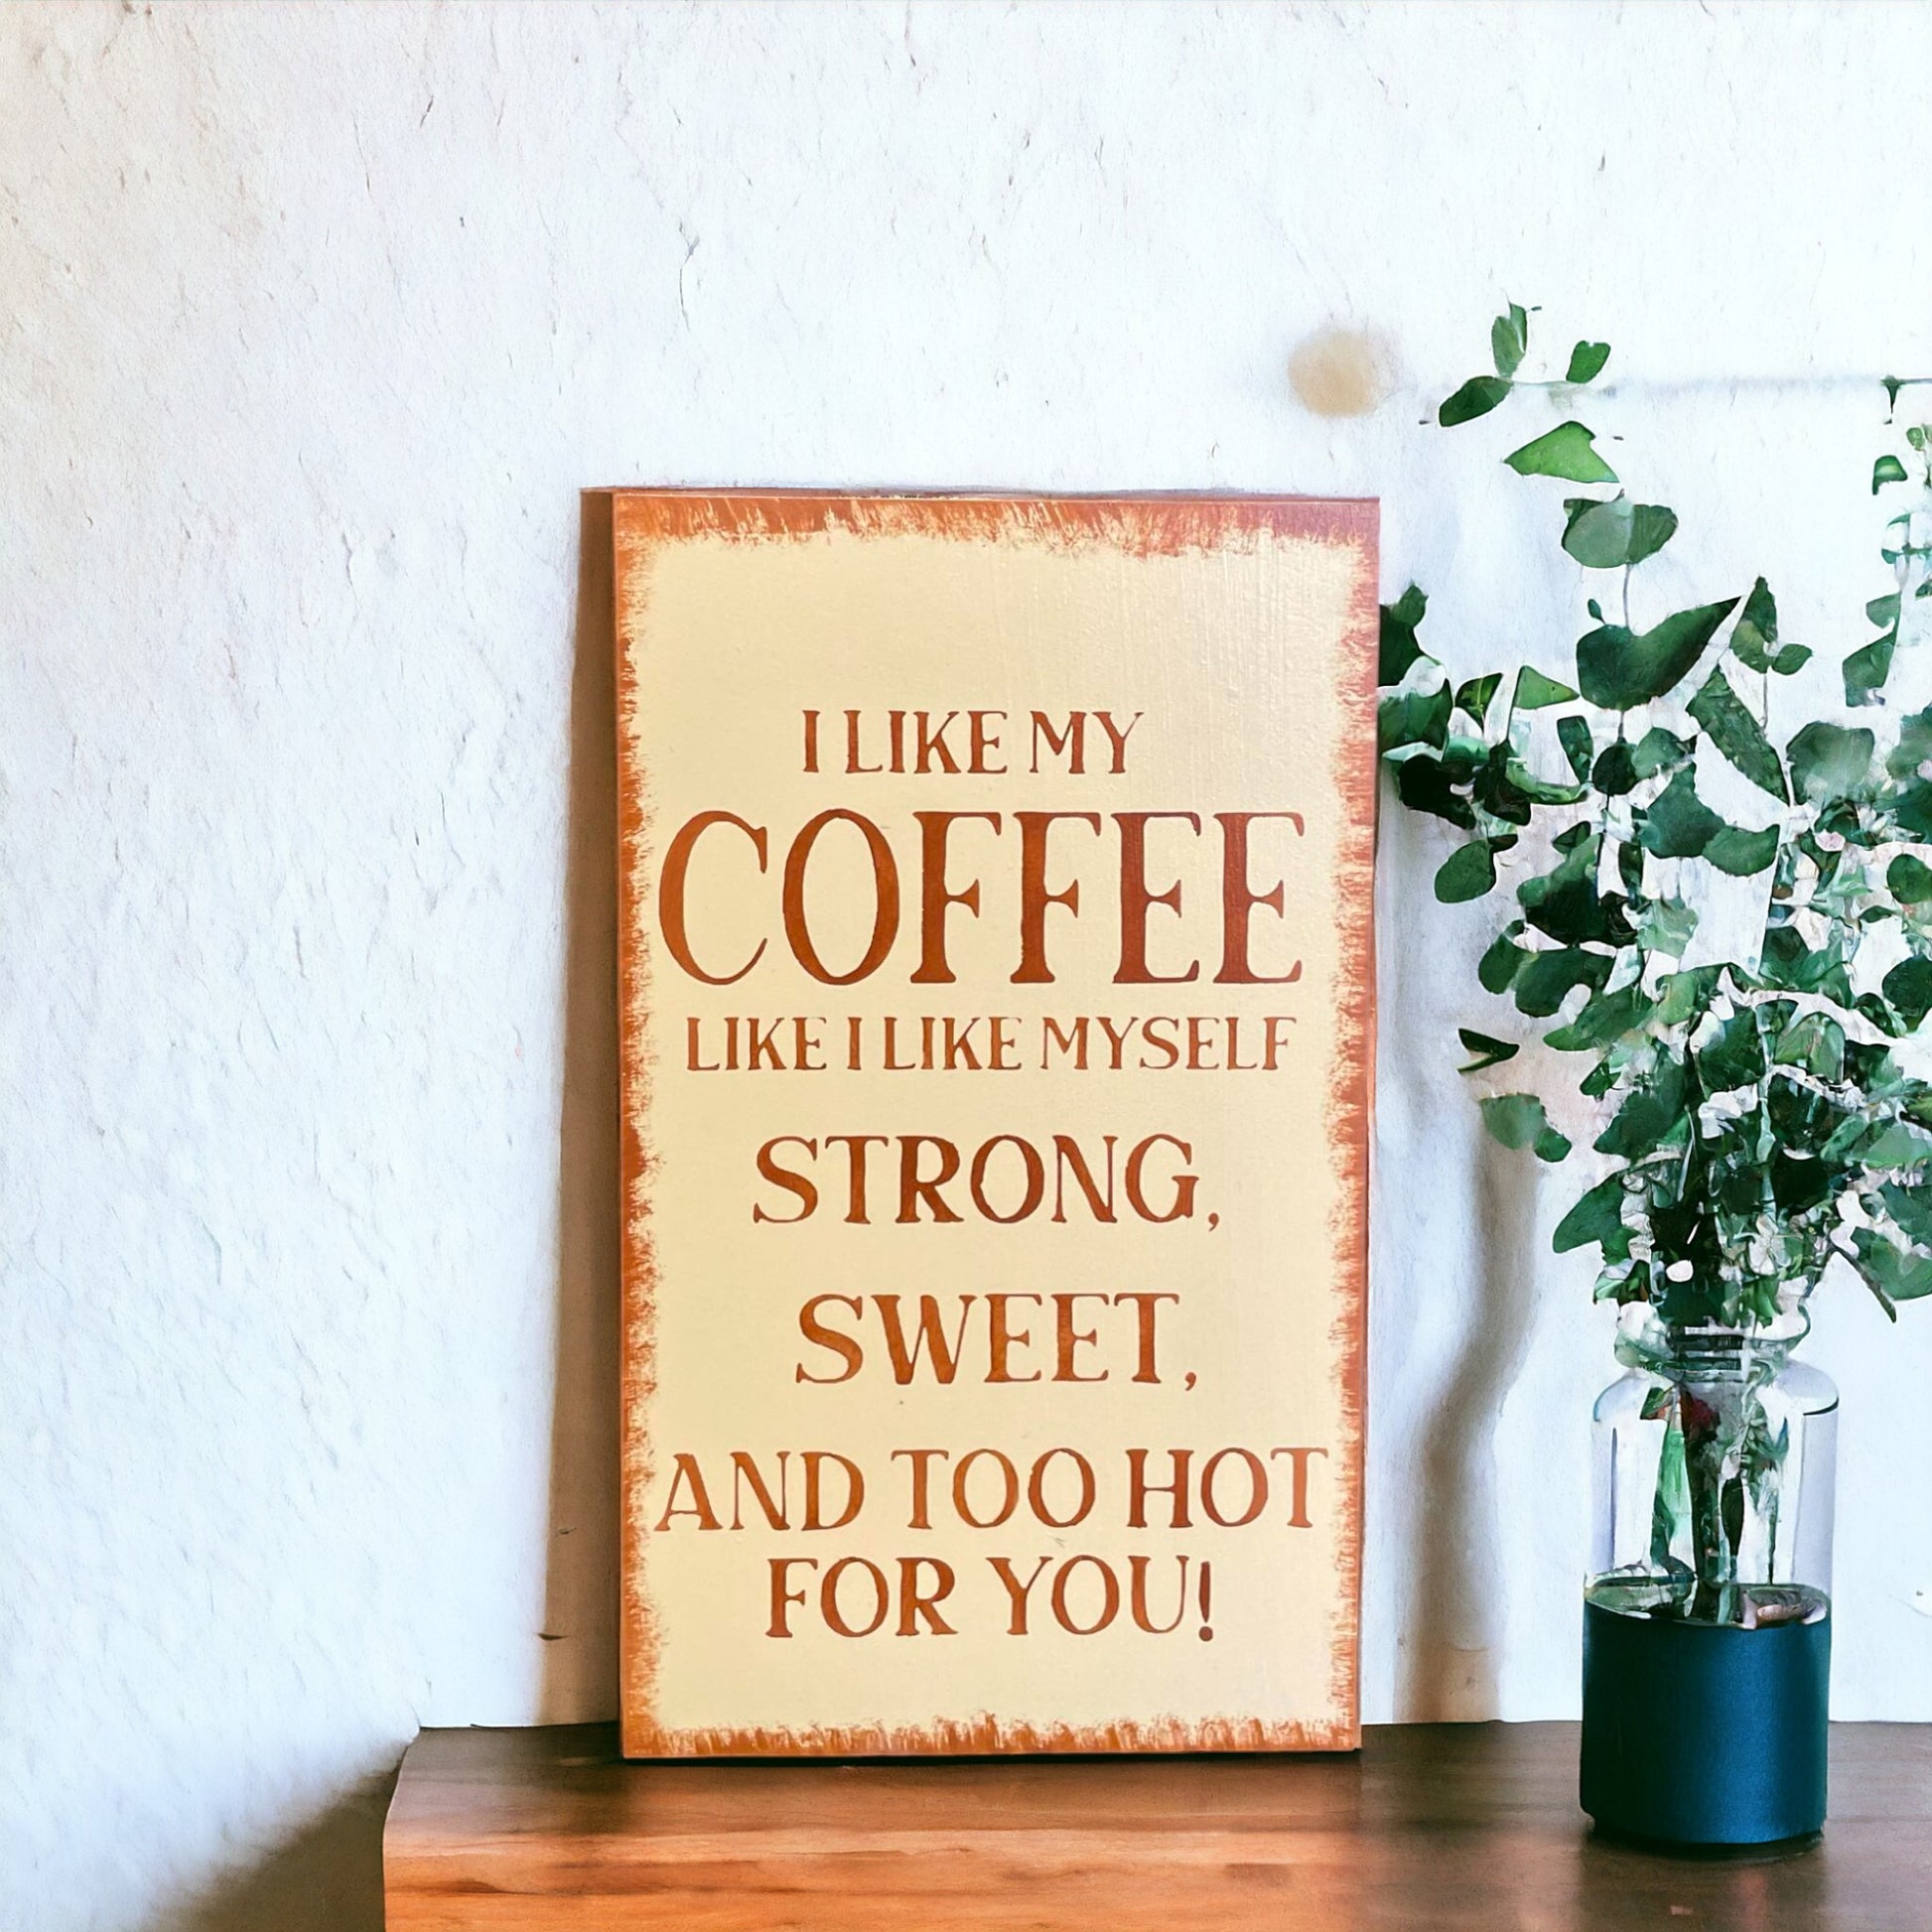 Funny coffee sign with quote 'I Like My Coffee like I like myself, strong, sweet, and too hot for you' on a creamy light brown background with dark brown text and brown border.